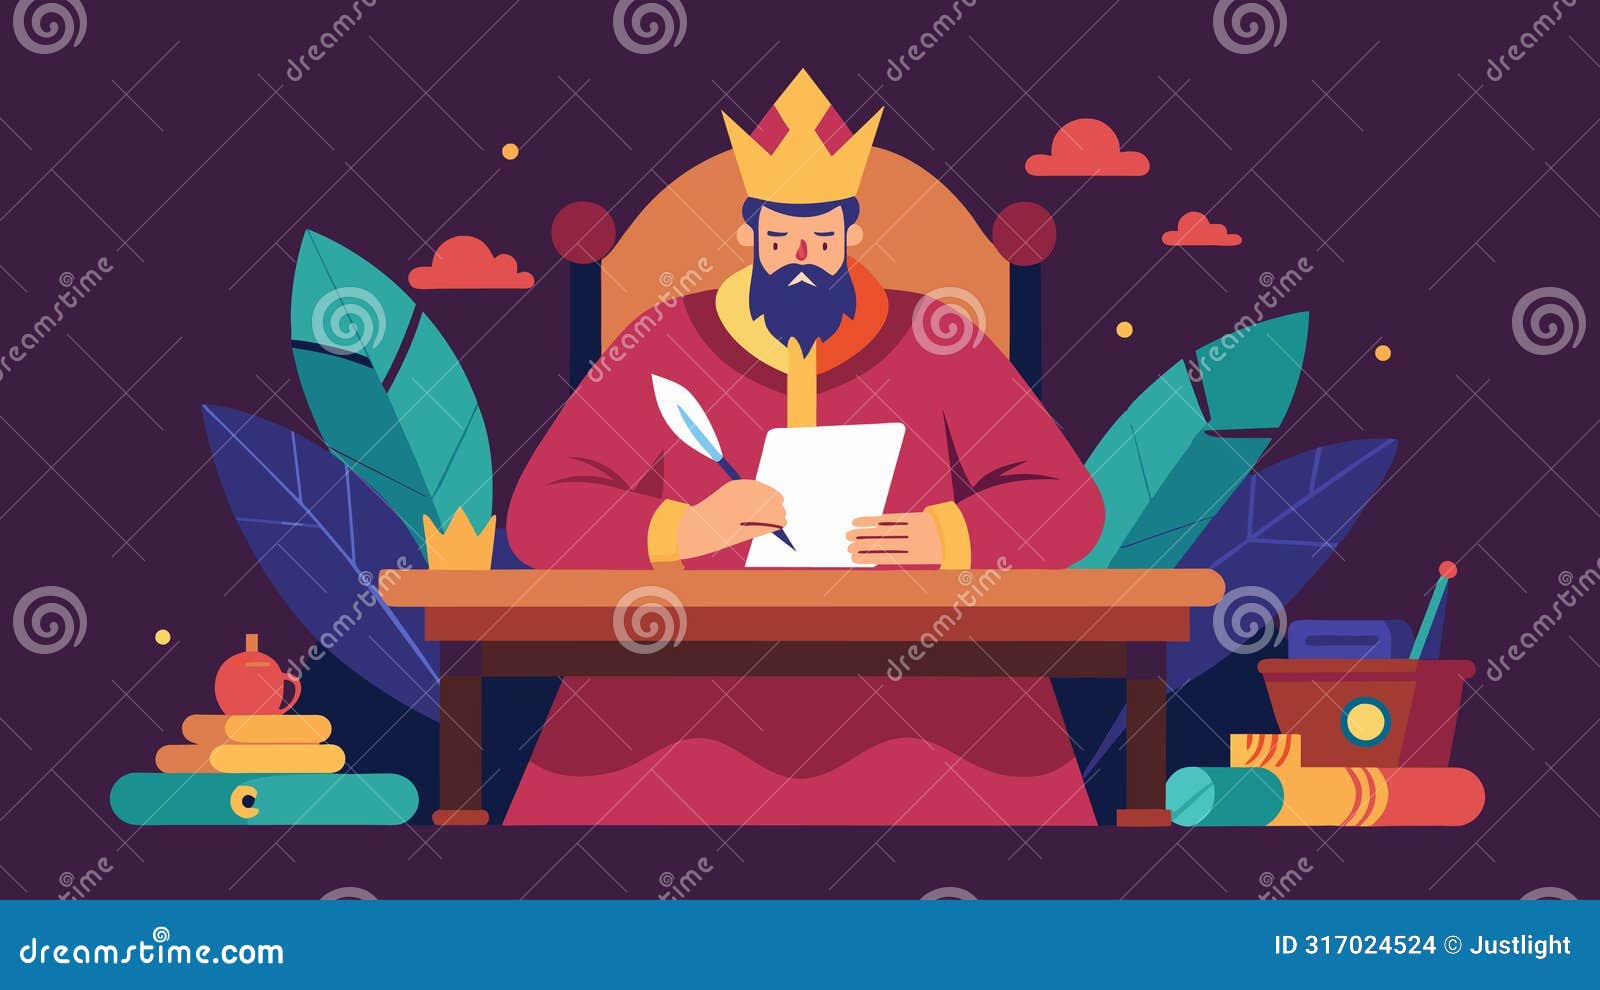 sitting at his writing desk the emperor journals about his thoughts and emotions processing them with honesty and